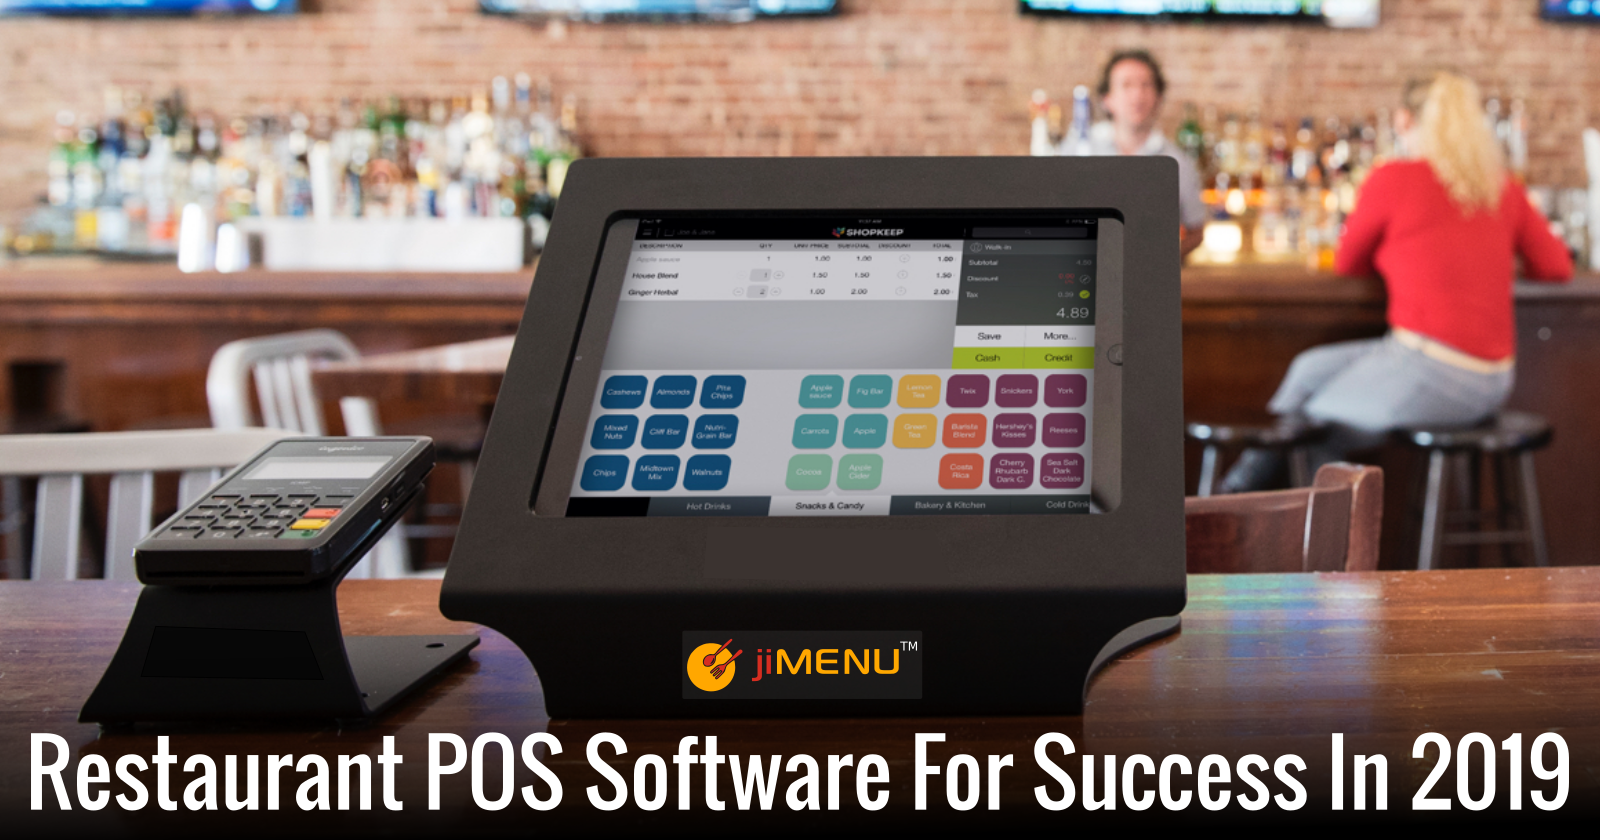 Restaurant POS Software For Success in 2019